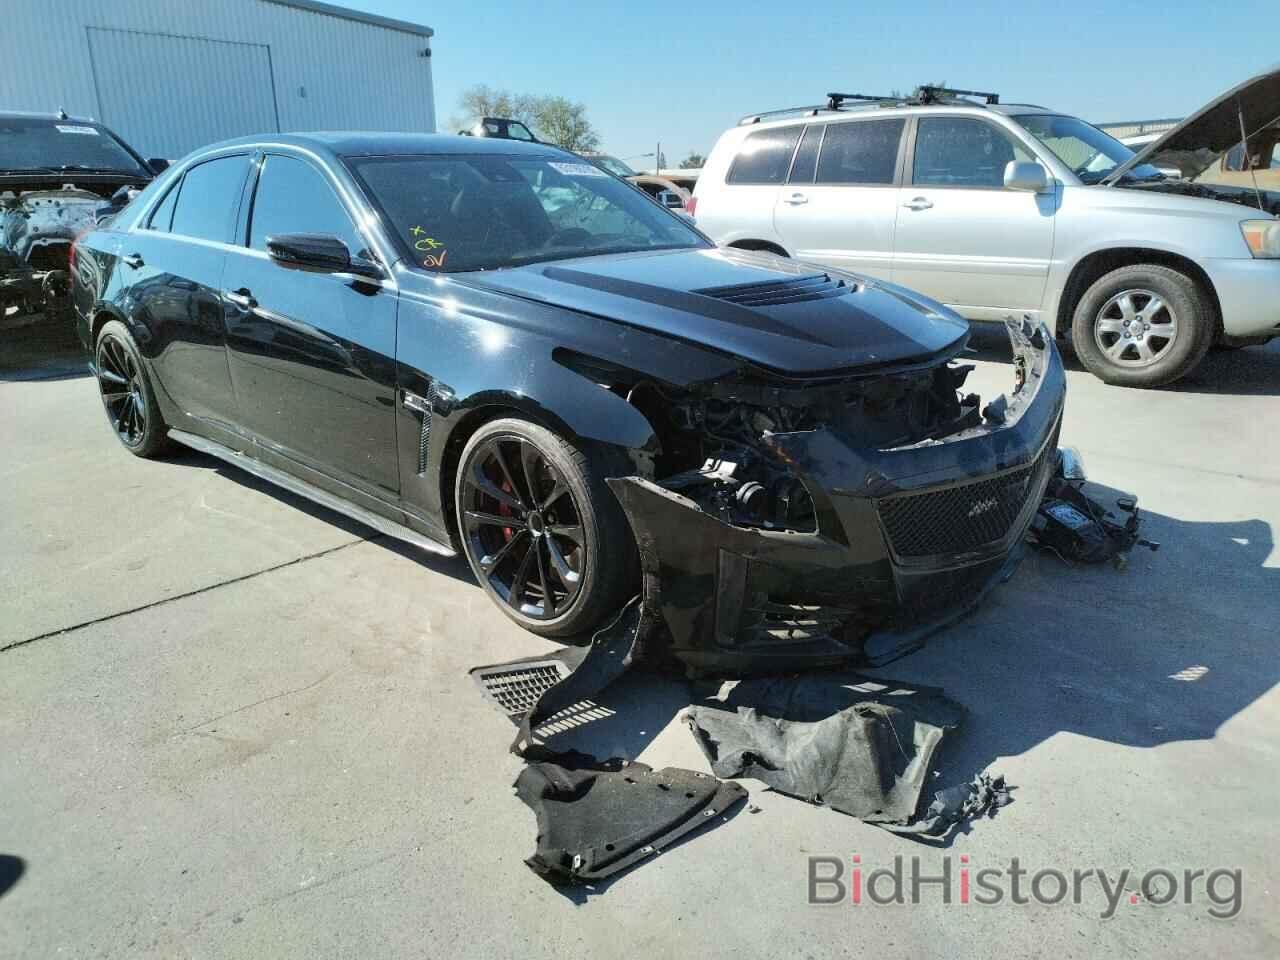 Photo 1G6A15S65H0189842 - CADILLAC CTS 2017